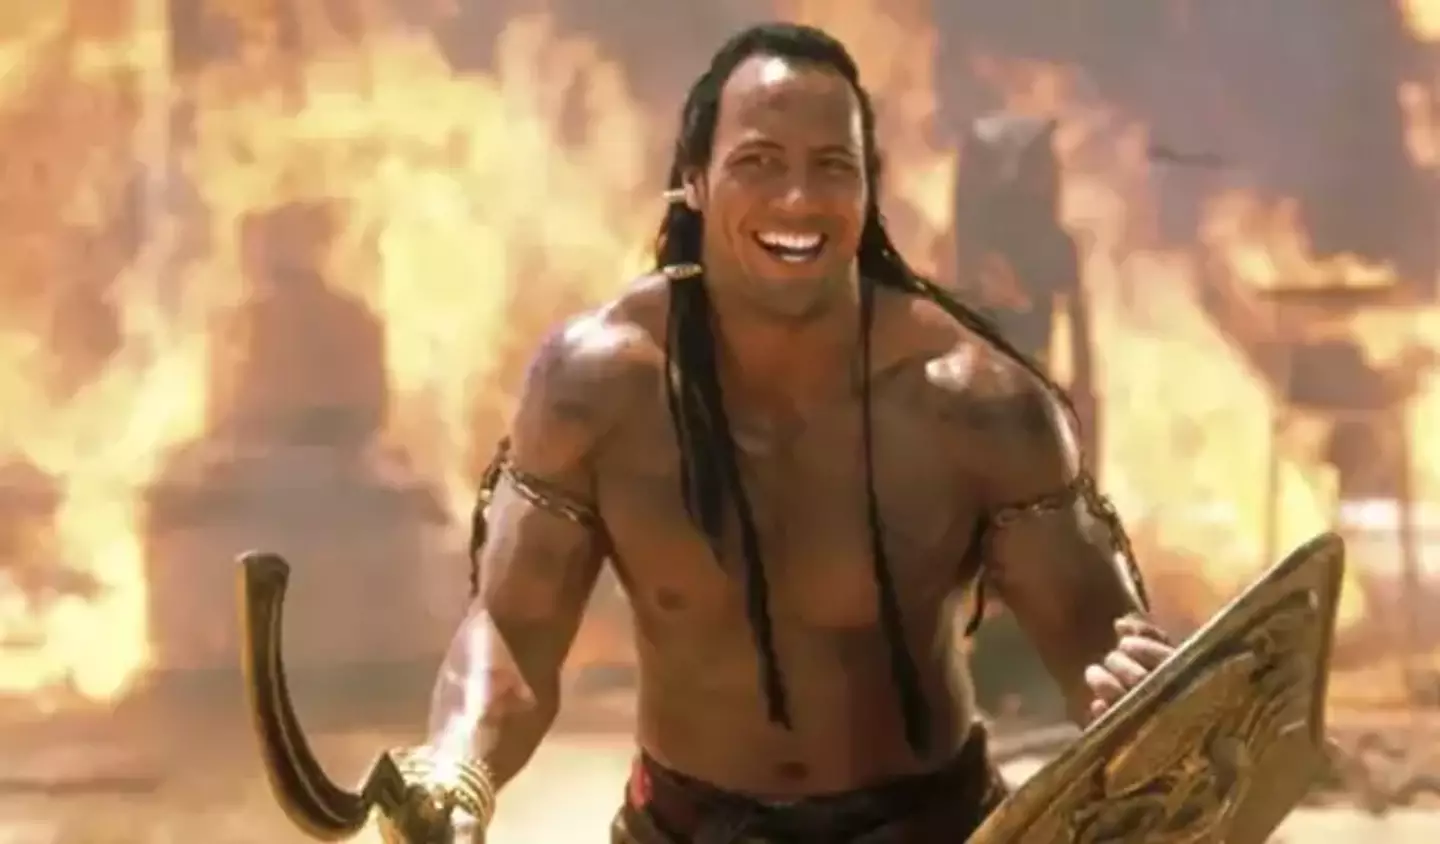 Johnson famously portrayed Mathayus, more commonly known as 'The Scorpion King'.